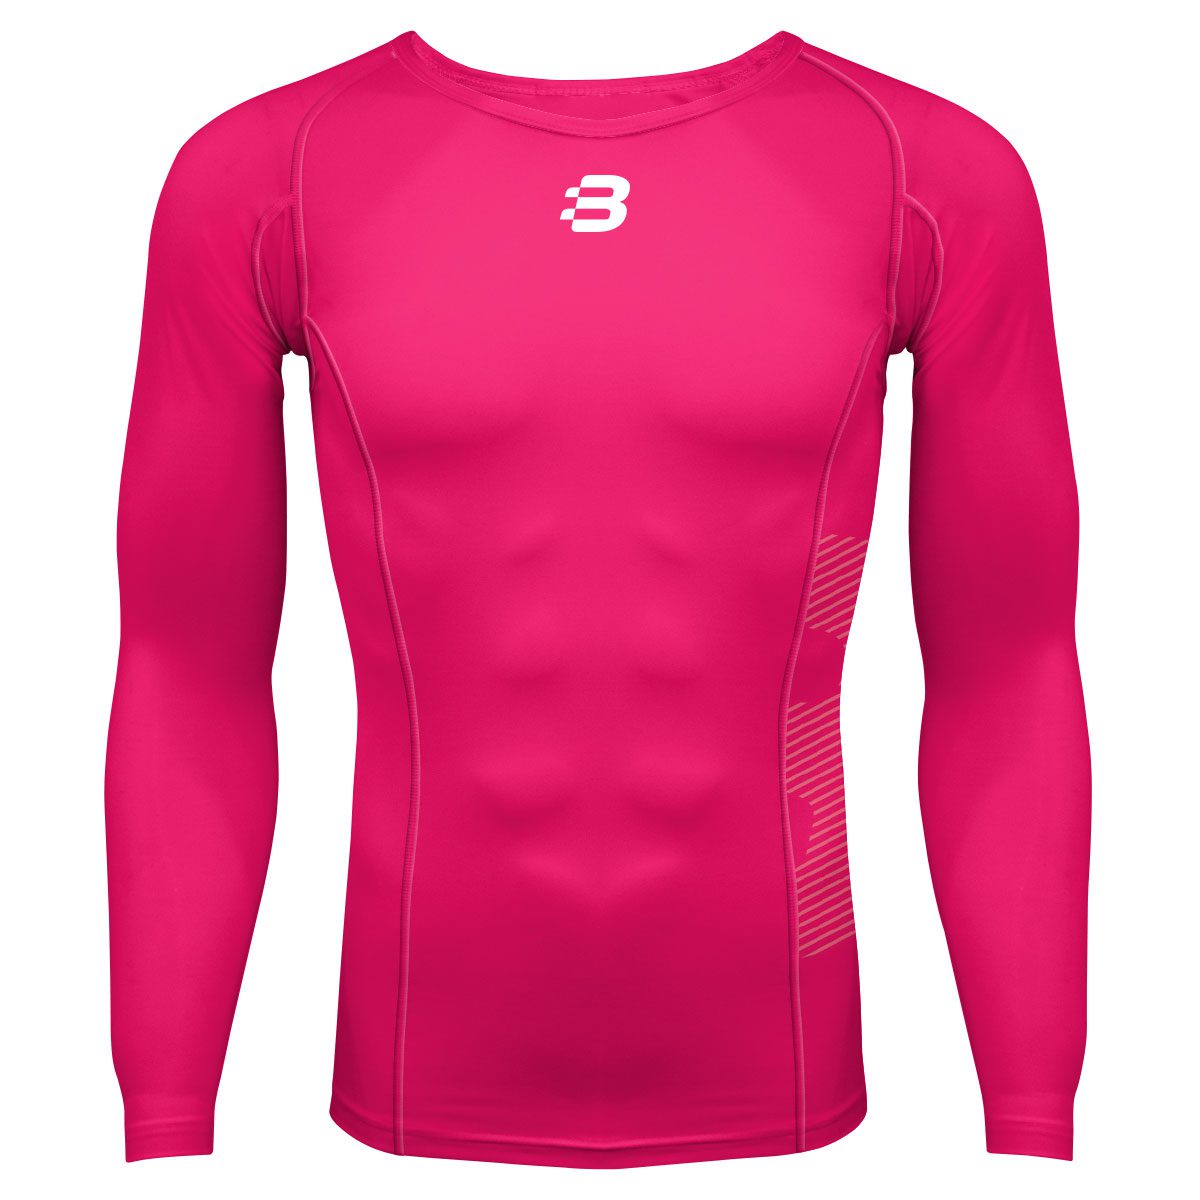 Mens Compression Long Sleeve Top - Pink 